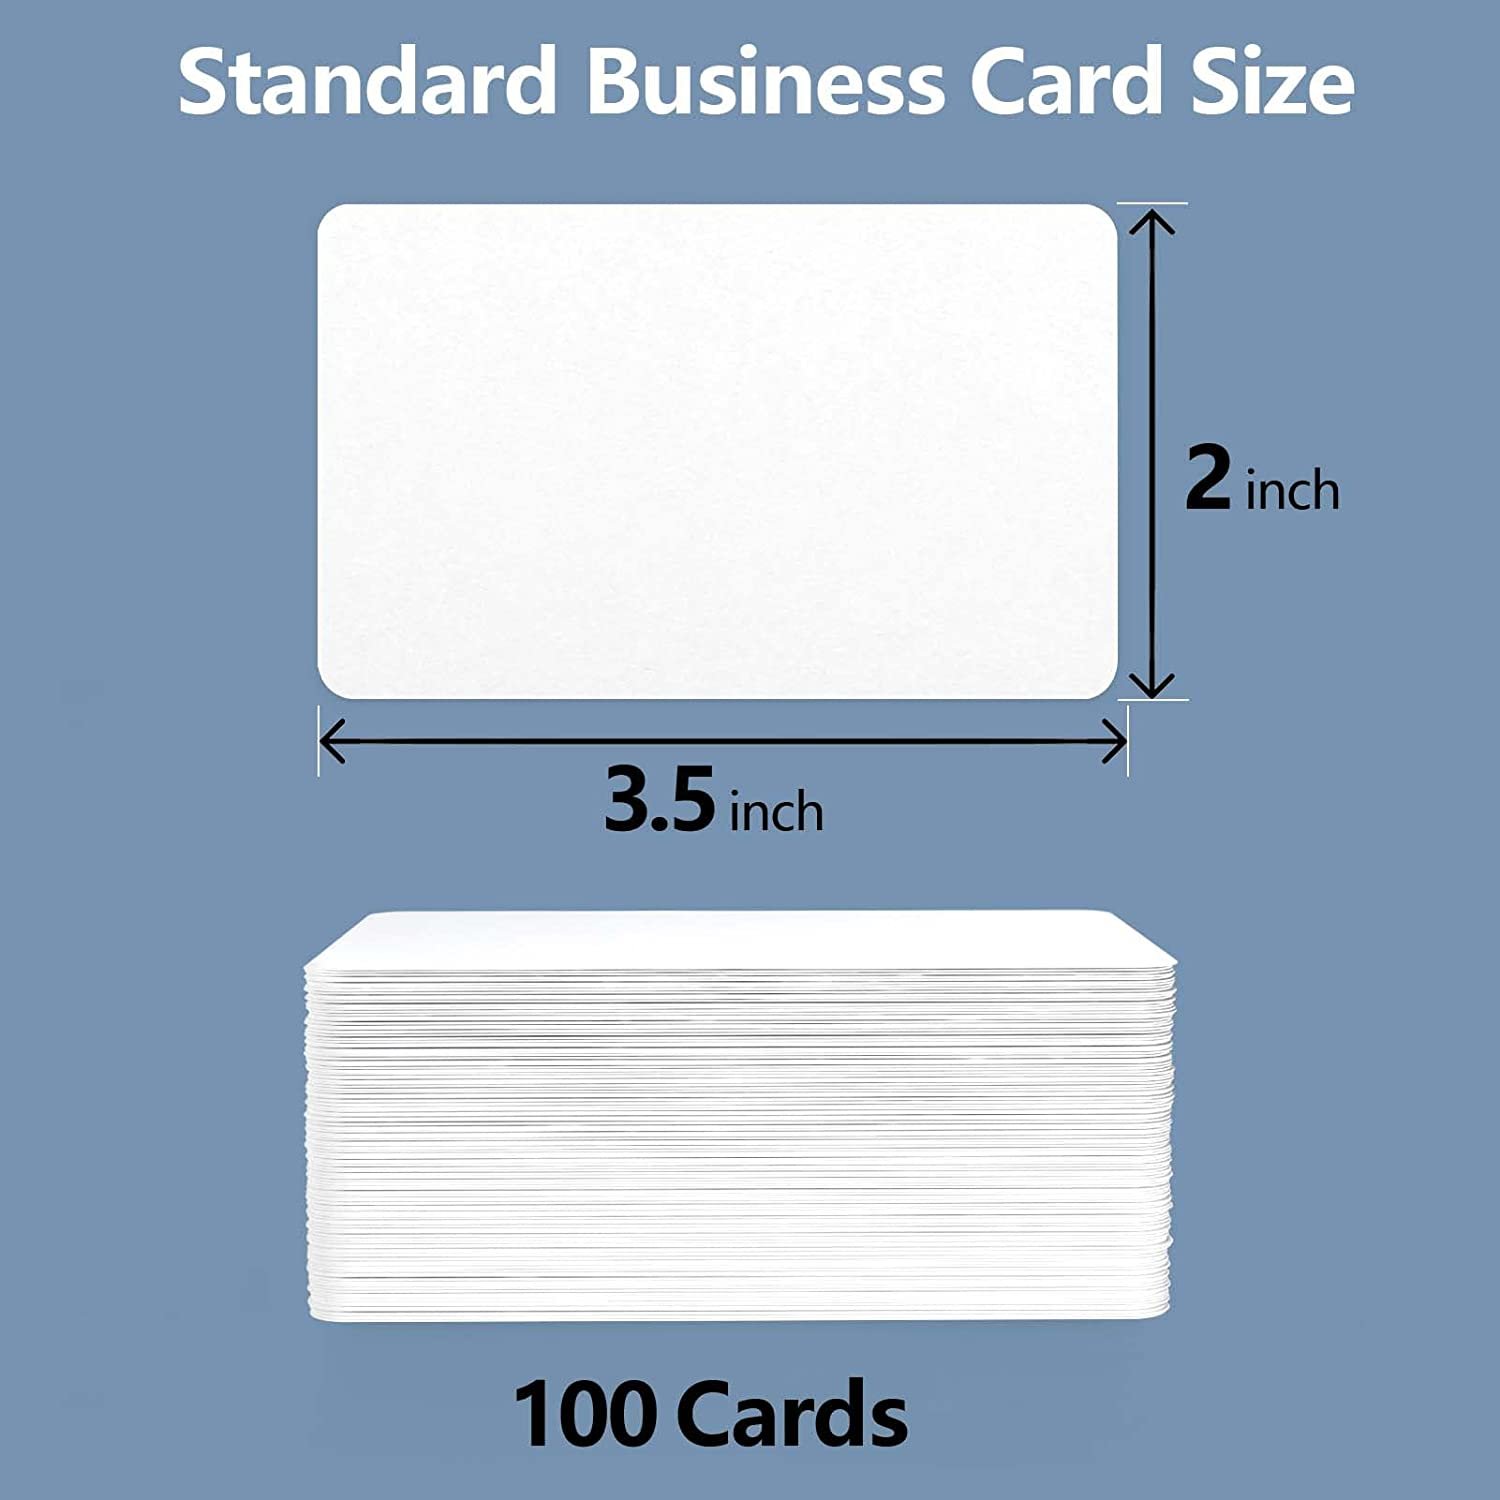 Small business cards